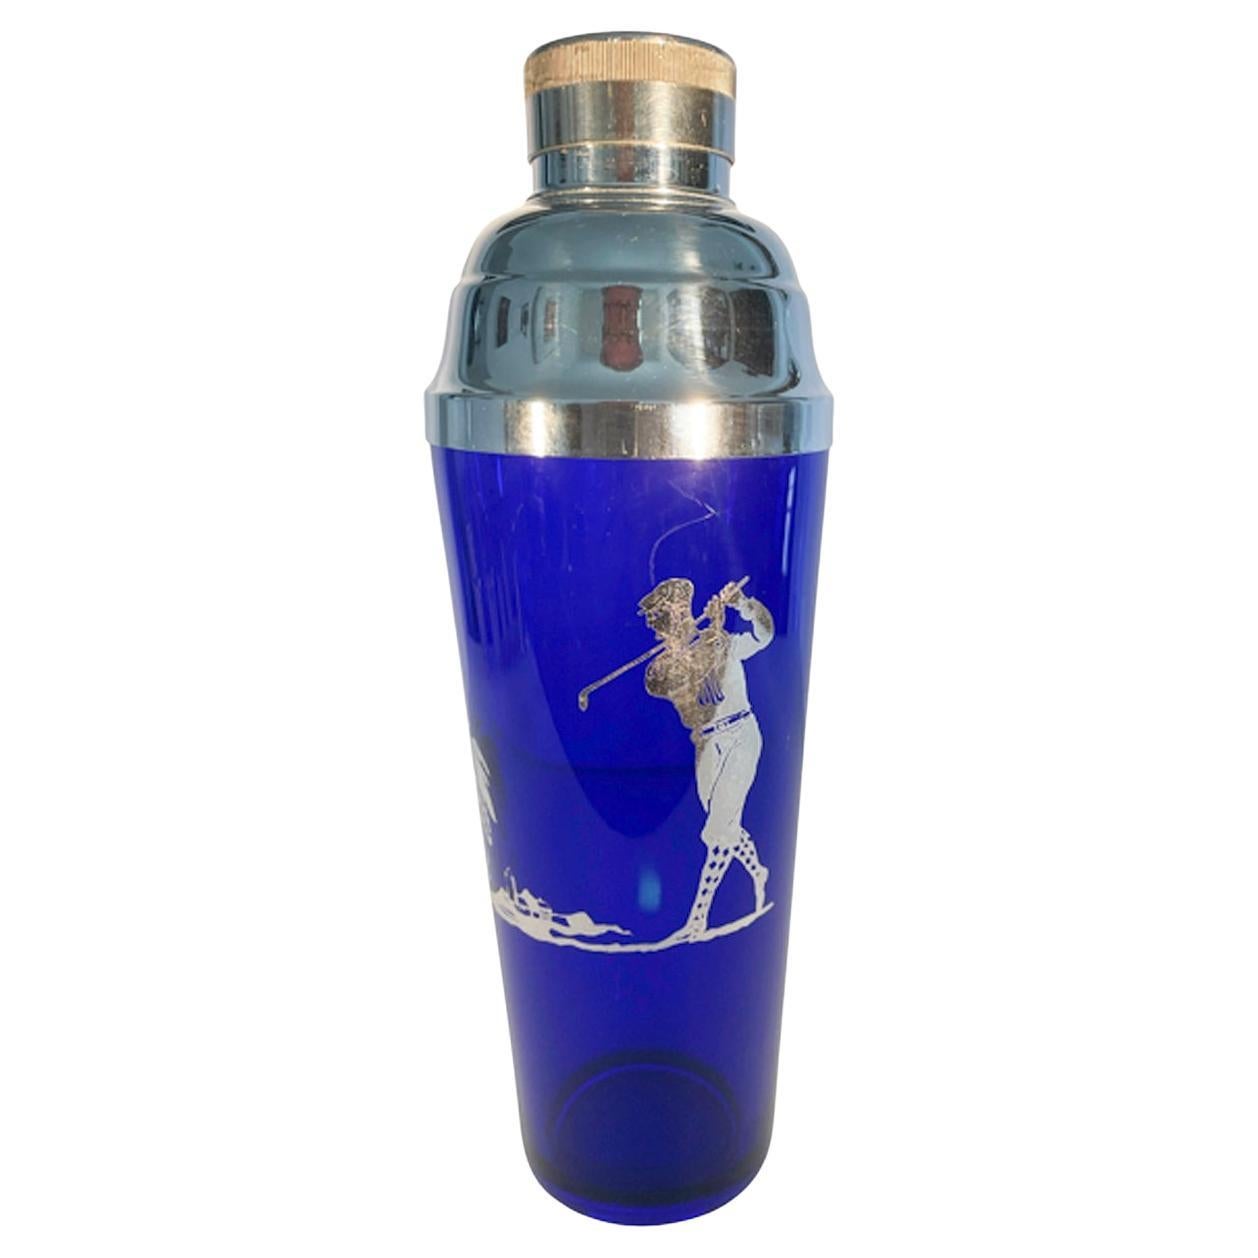 Art Deco Silver Overlay Cobalt Cocktail Shaker with Golfer and Palm Tree